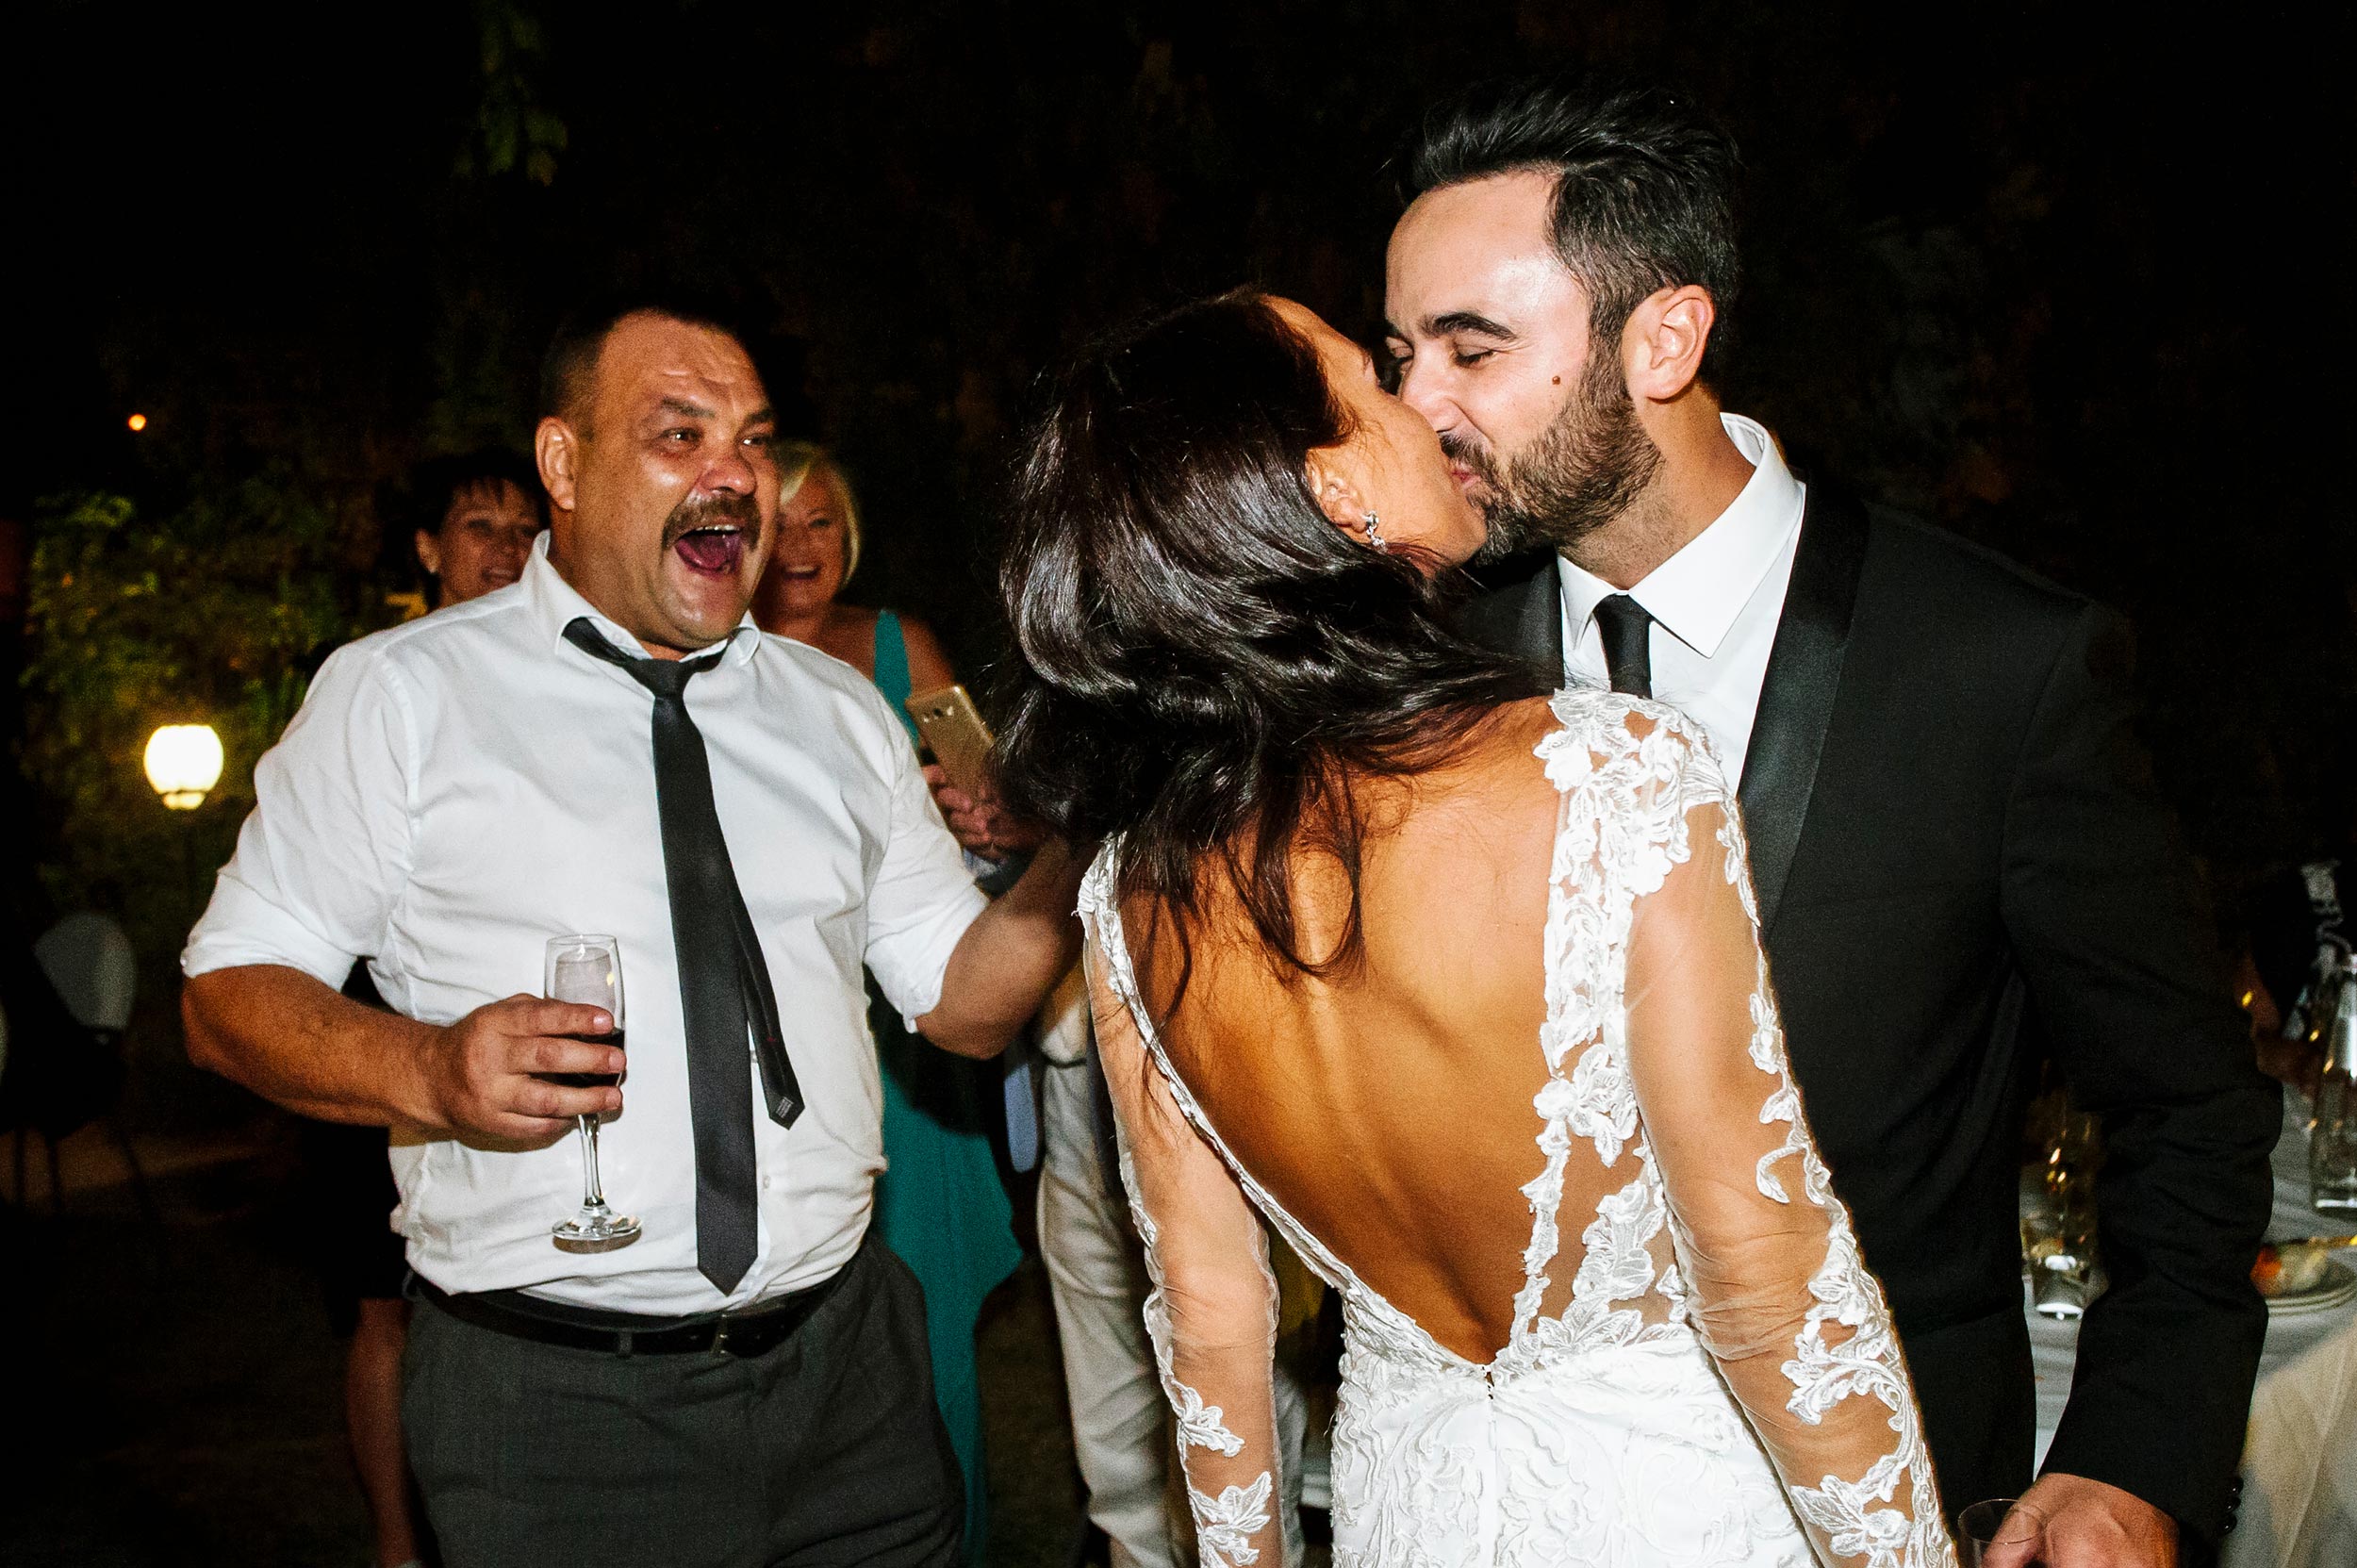 bride-and-groom-kissing-in-front-of-brides-father.jpg